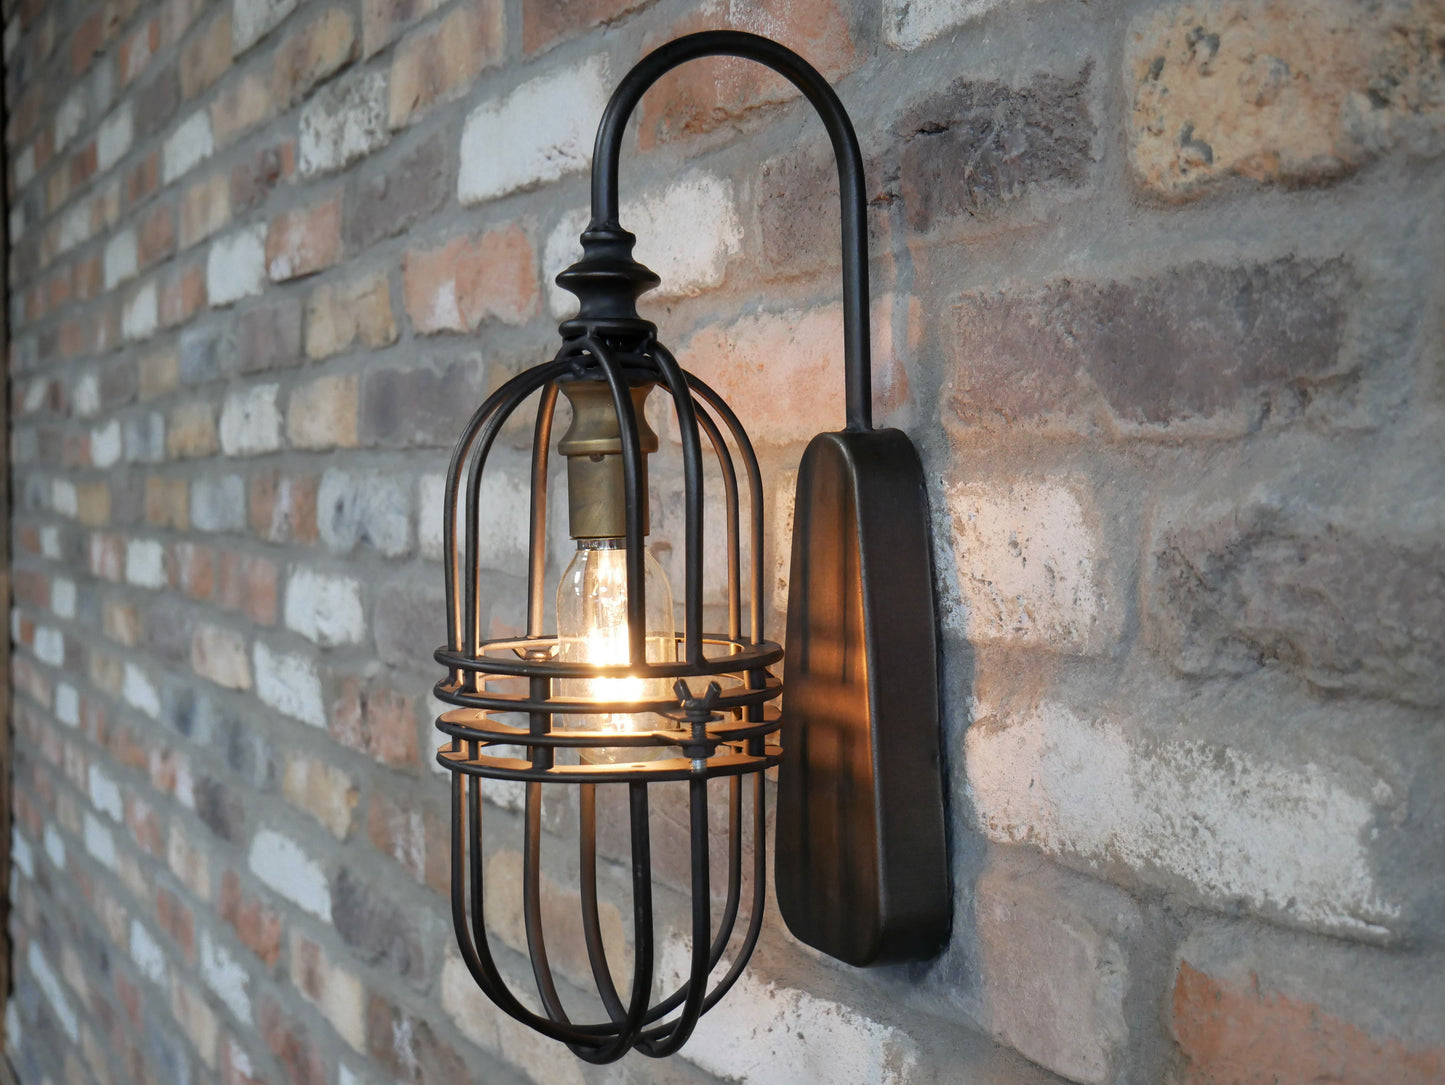 Industrial Wall Light - LED Battery operated